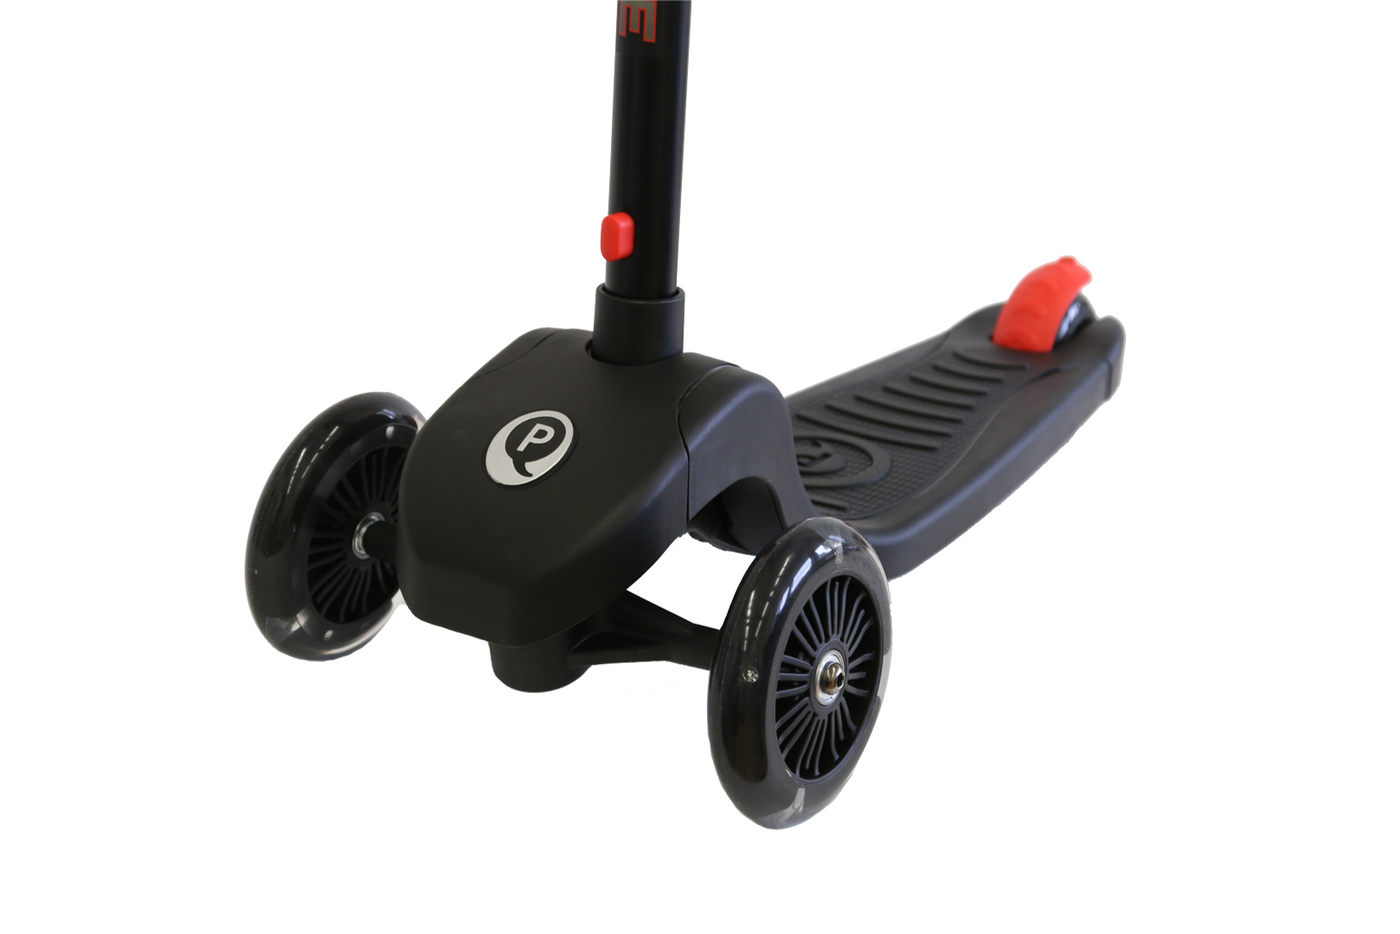 Red Future LED Light Scooter